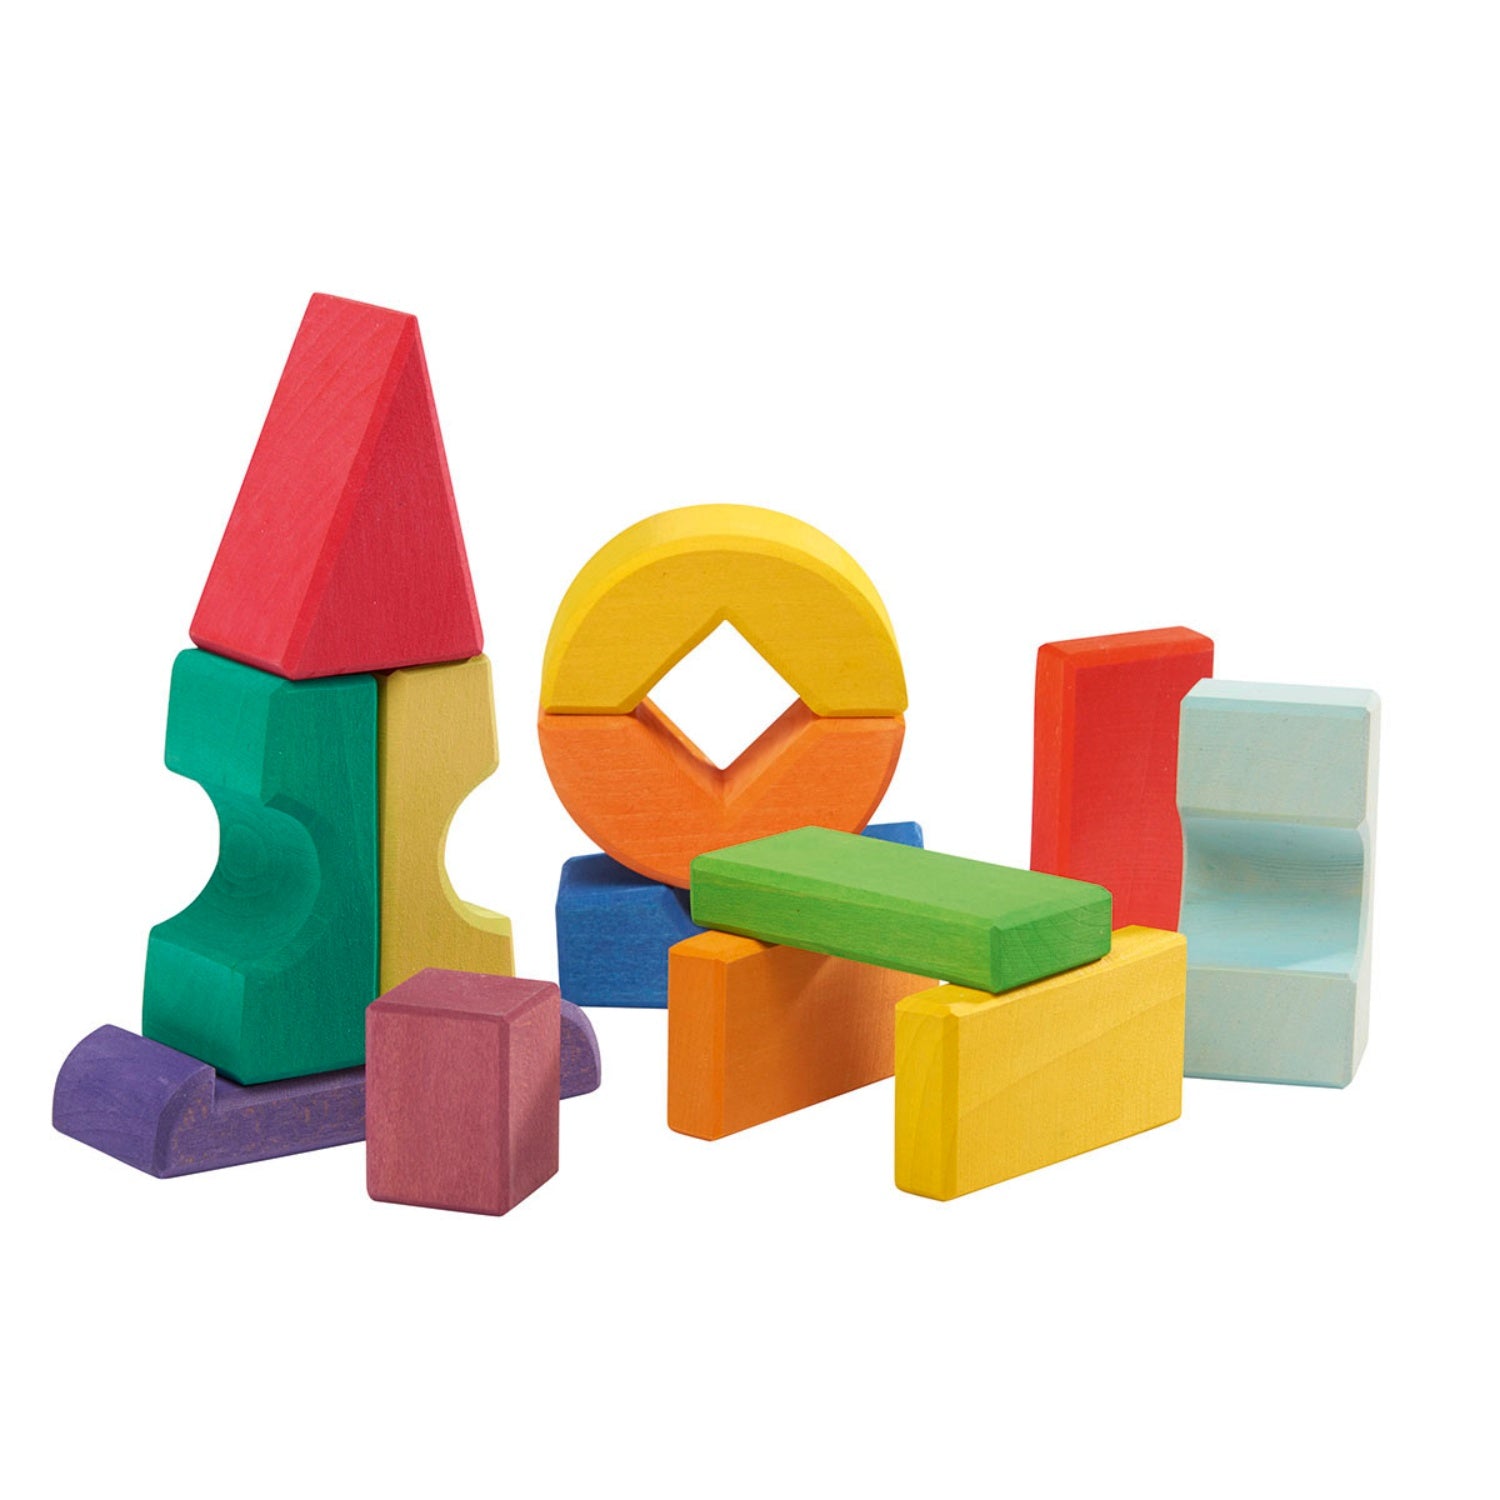 Gluckskafer Crooked Tower Wooden Blocks | Imaginative Play Wooden Toys | Waldorf Education and Montessori Education | Wooden Blocks | BeoVERDE.ie